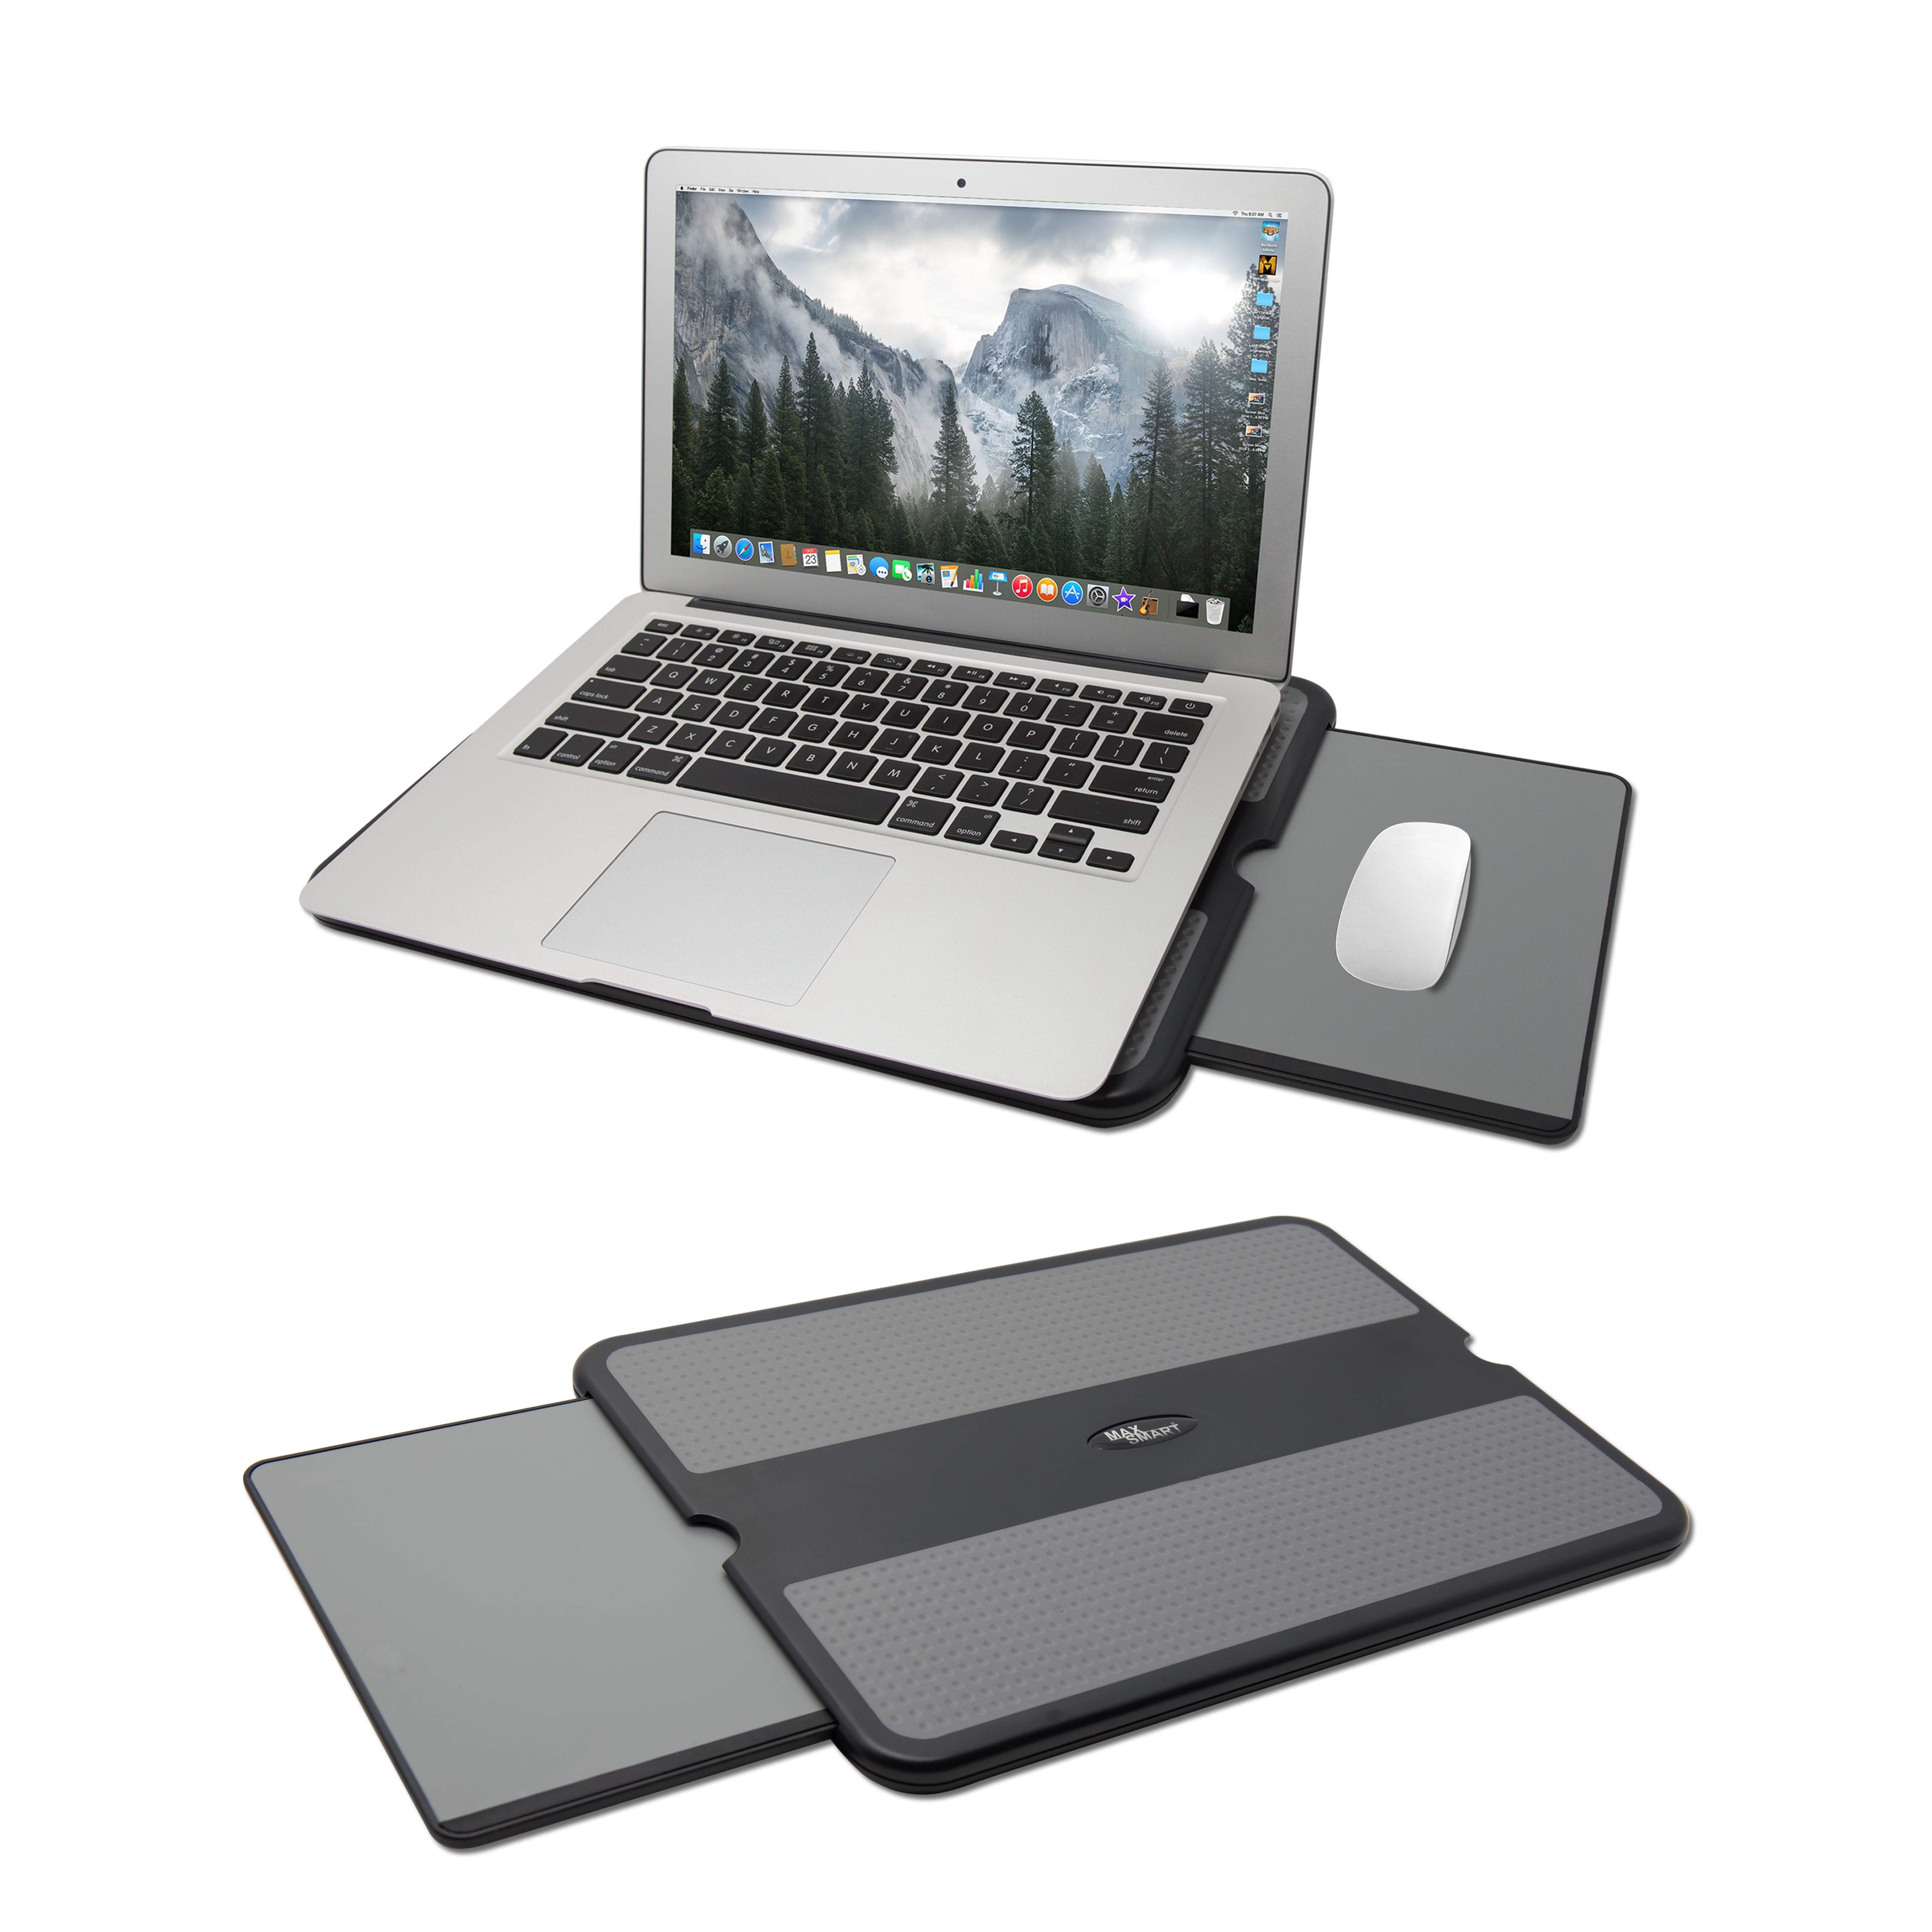 EHO Laptop Lap Pad - Laptop Stand Pad w Retractable Mouse Pad Tray,  Anti-Slip Heat Shield